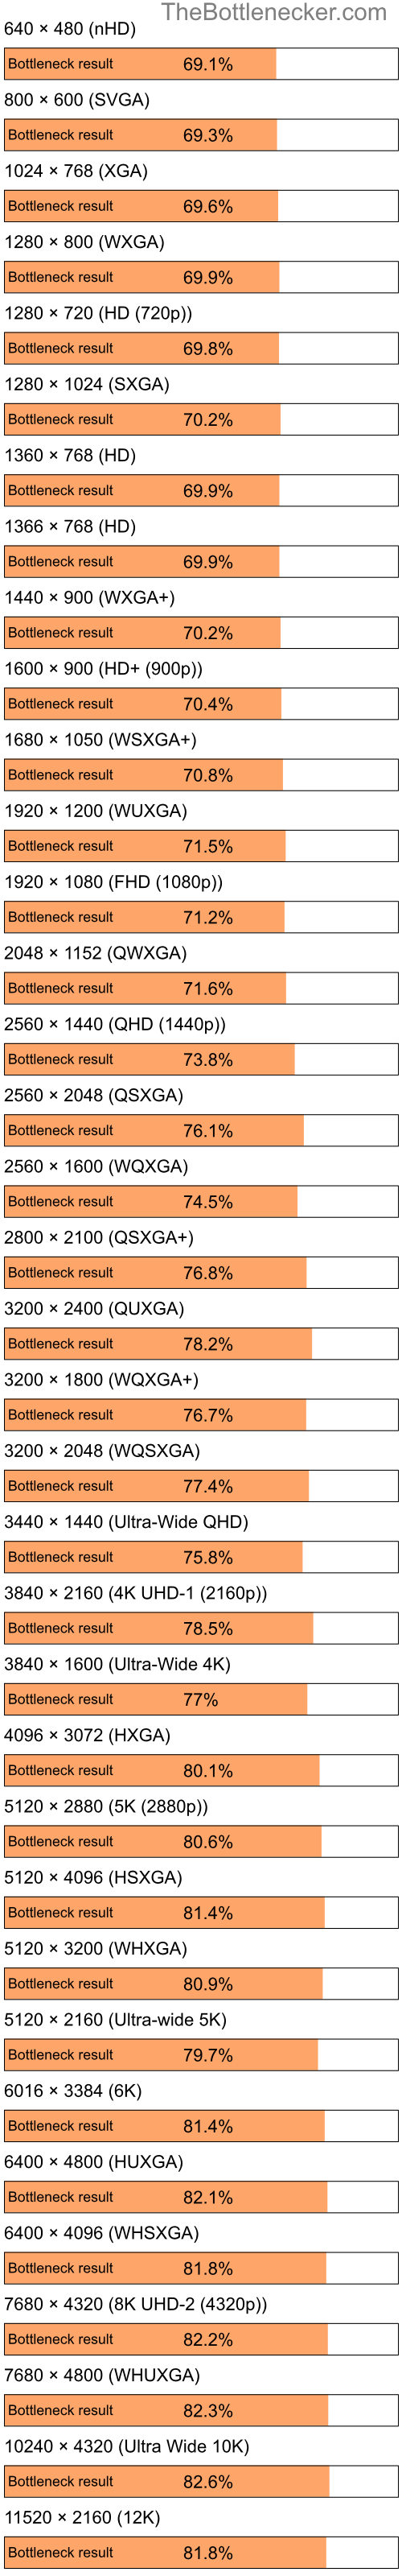 Bottleneck results by resolution for Intel Pentium 4 and AMD Mobility Radeon HD 4225 in7 Days to Die